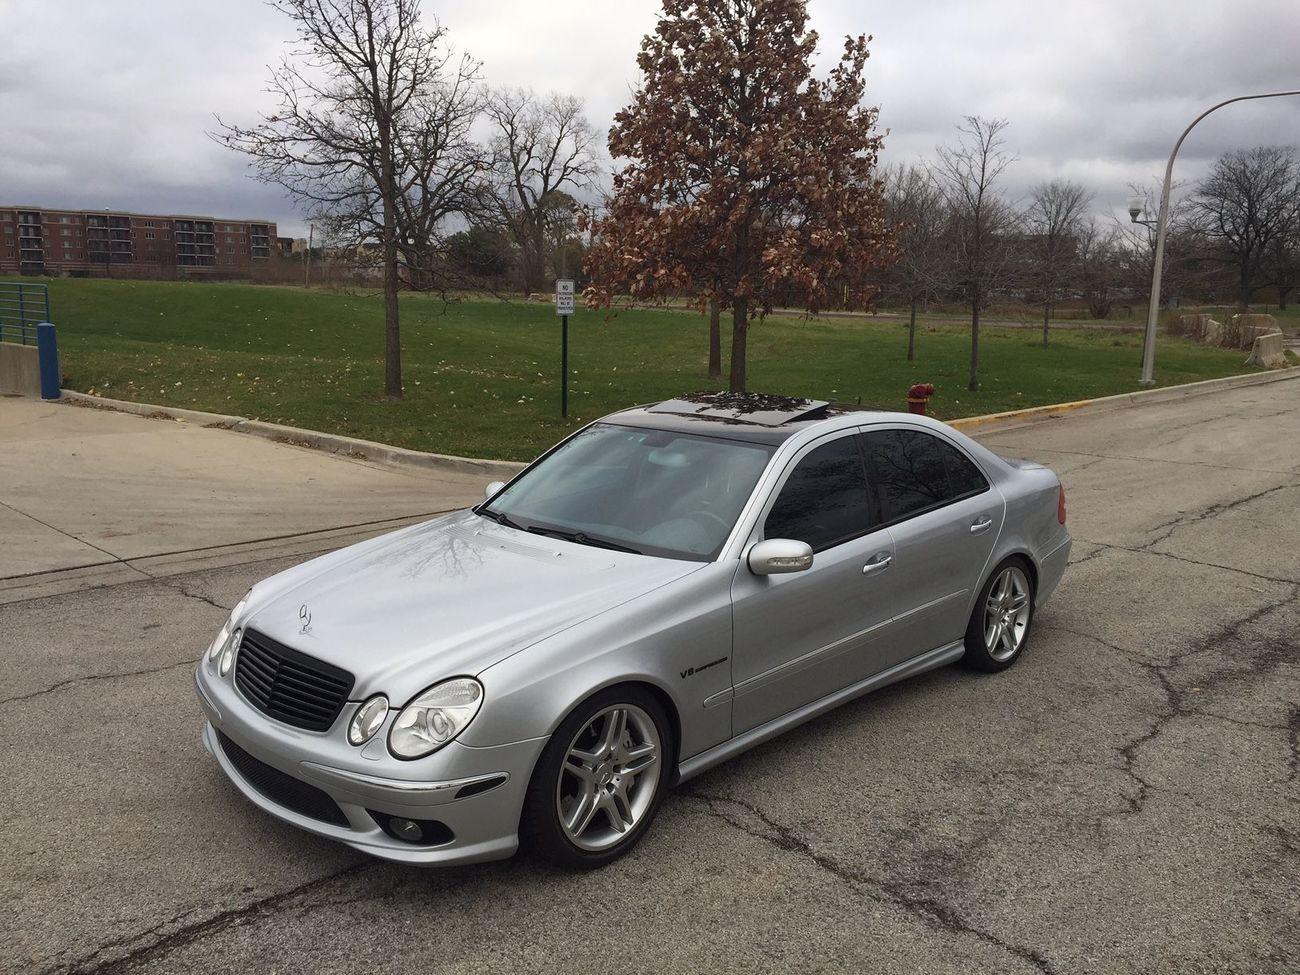 2006 Mercedes-Benz E55 AMG - 2006 E55 AMG SILVER (CHICAGO) LOW MILES - Used - VIN WDBUF76J16A860435 - 65,405 Miles - 8 cyl - 2WD - Automatic - Sedan - Silver - Chicago, IL 60630, United States